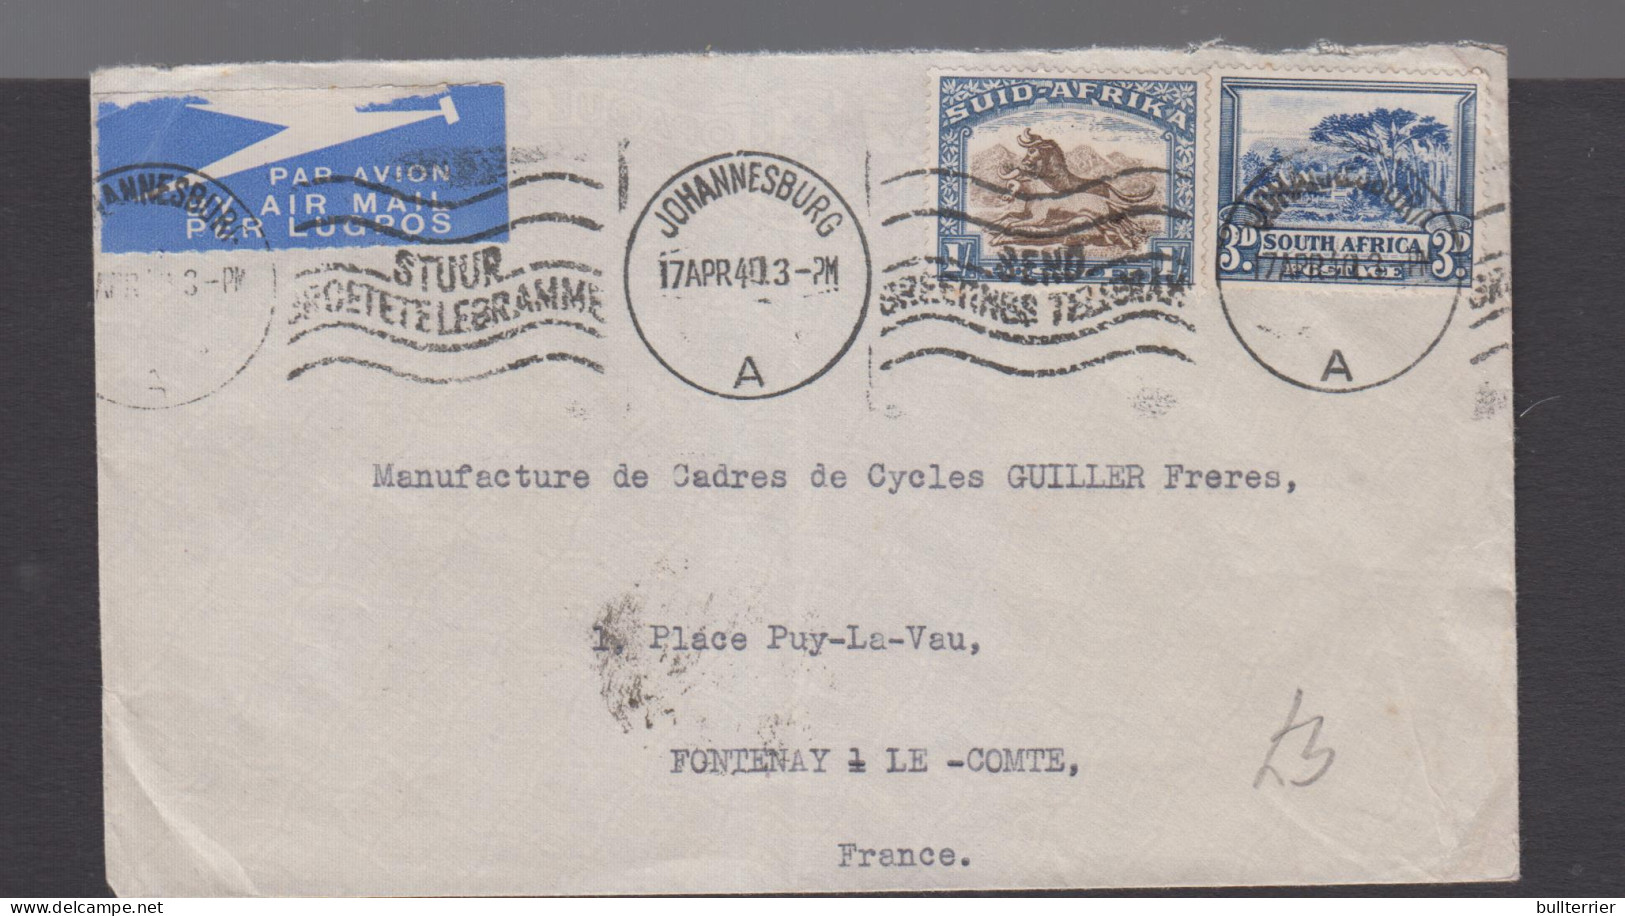 AIRMAILS - SOUTH AFRICA - 1940 - AIRMAIL COVER JO BURG TO FONTENAY LE COMTE  - Luftpost